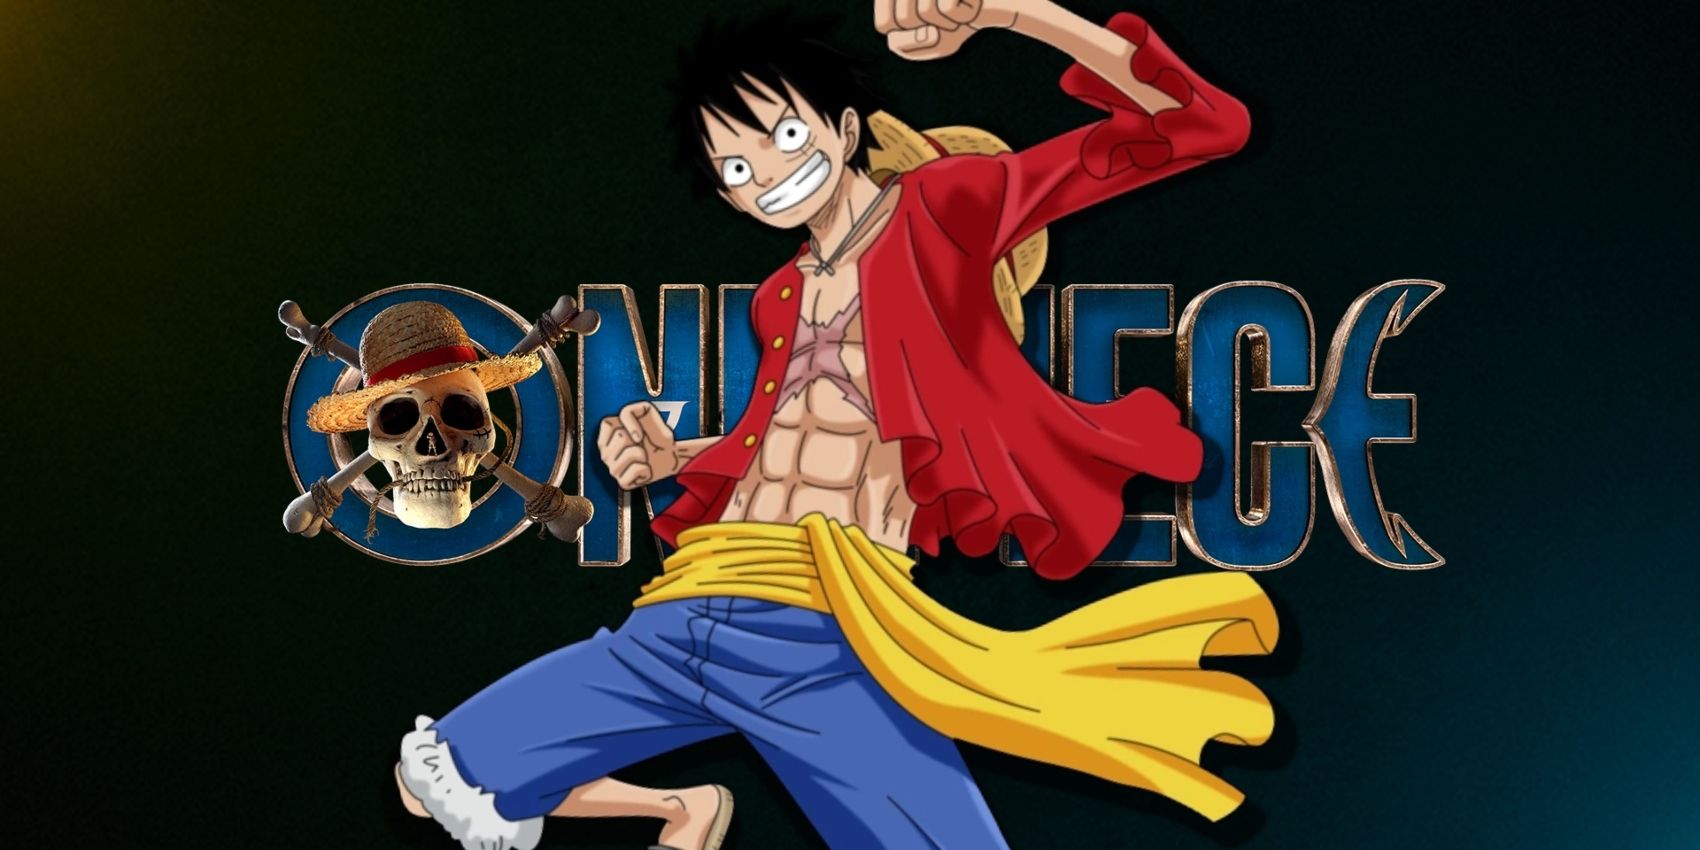 Monkey D. Luffy from the 'One Piece' anime posing over the logo for Netflix's live-action adaptation of the manga series